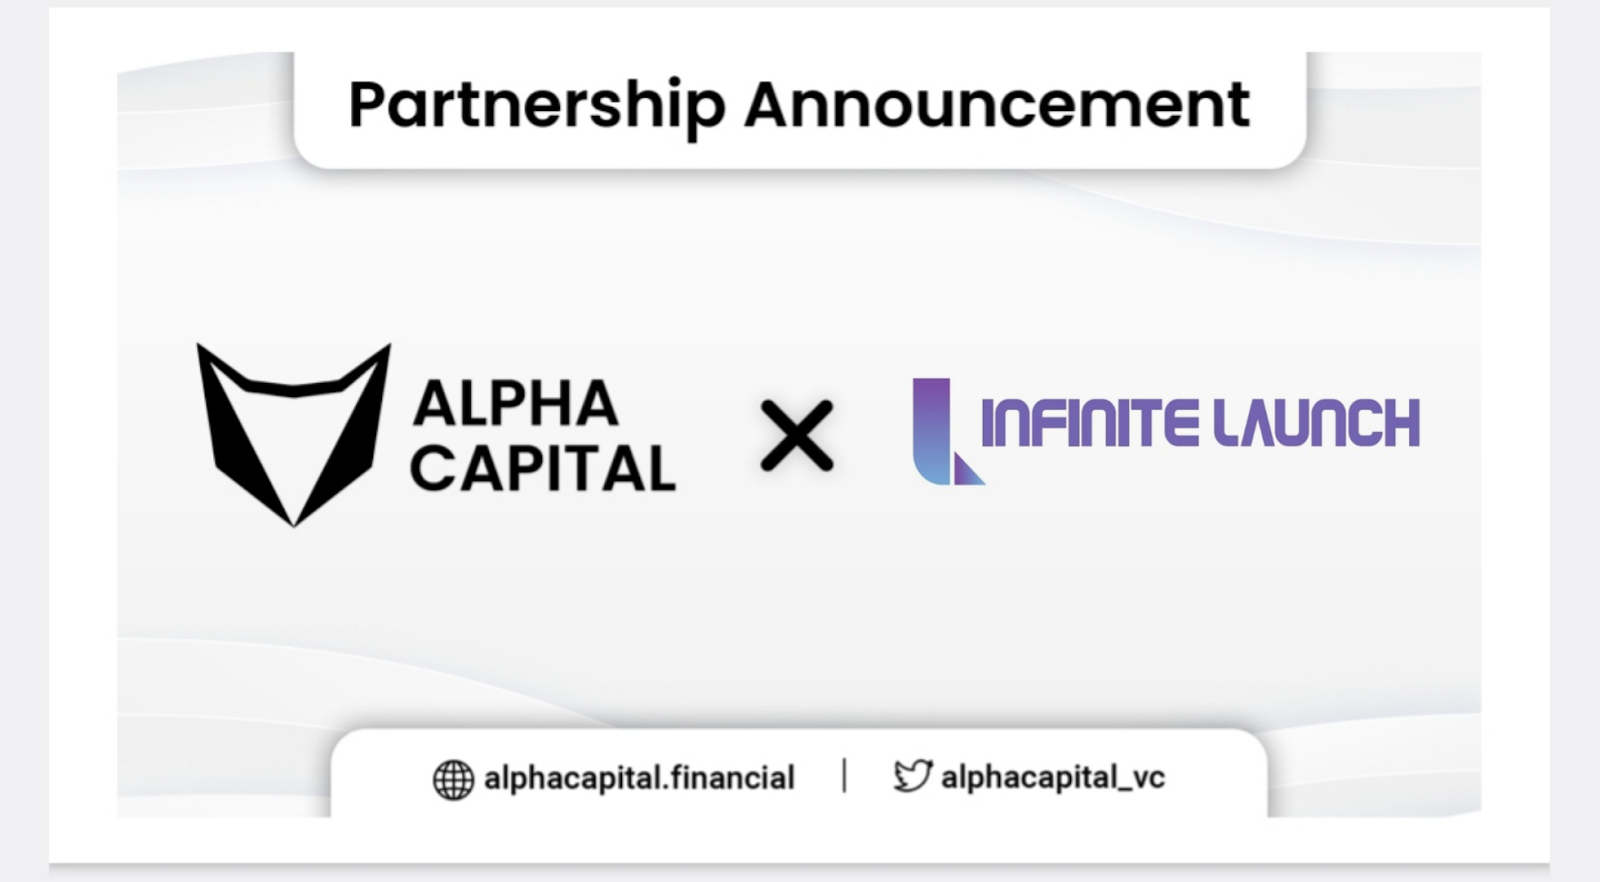 Infinite Launch has been in partnership with big venture capital firms.